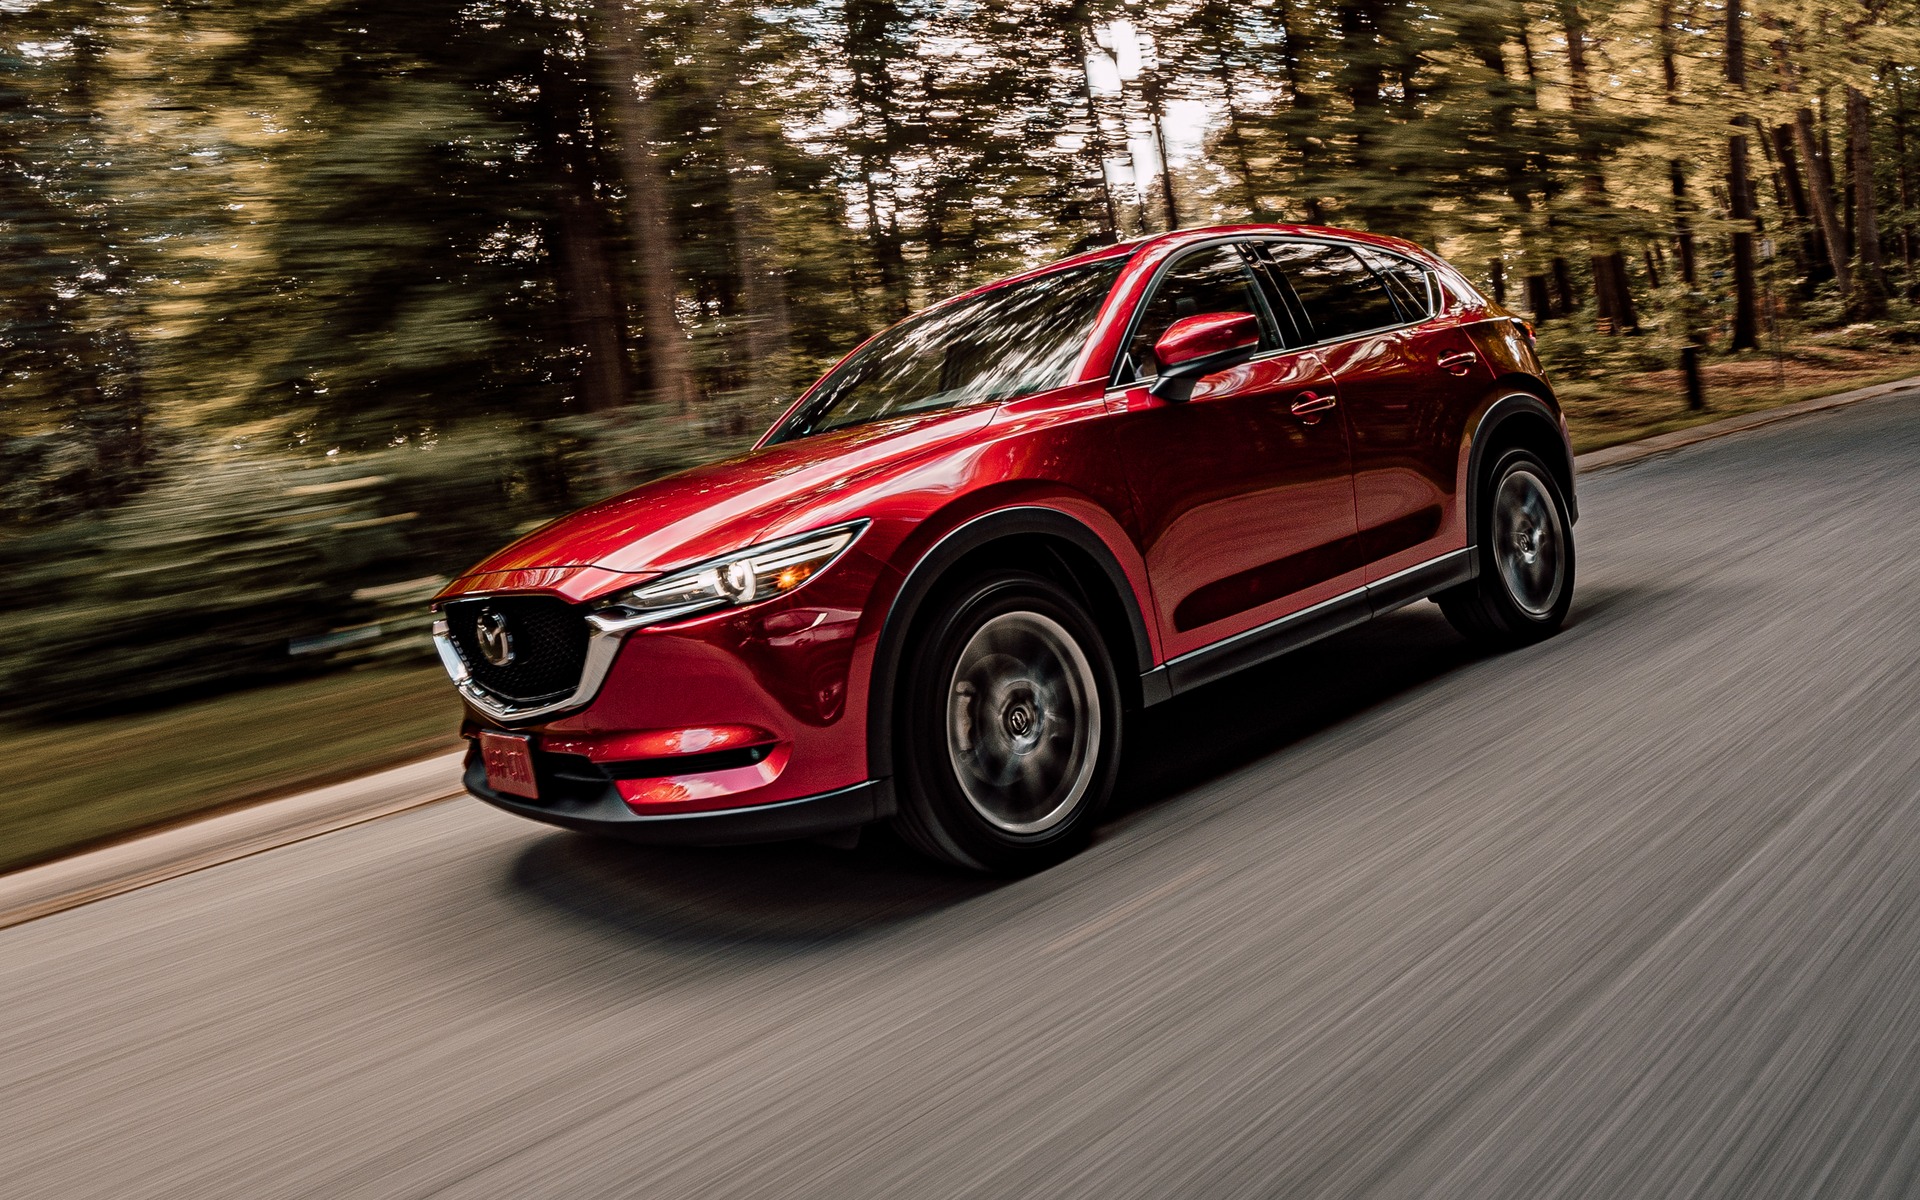 2020 Mazda CX-5 to Receive More Torque, Extra Features - The Car Guide